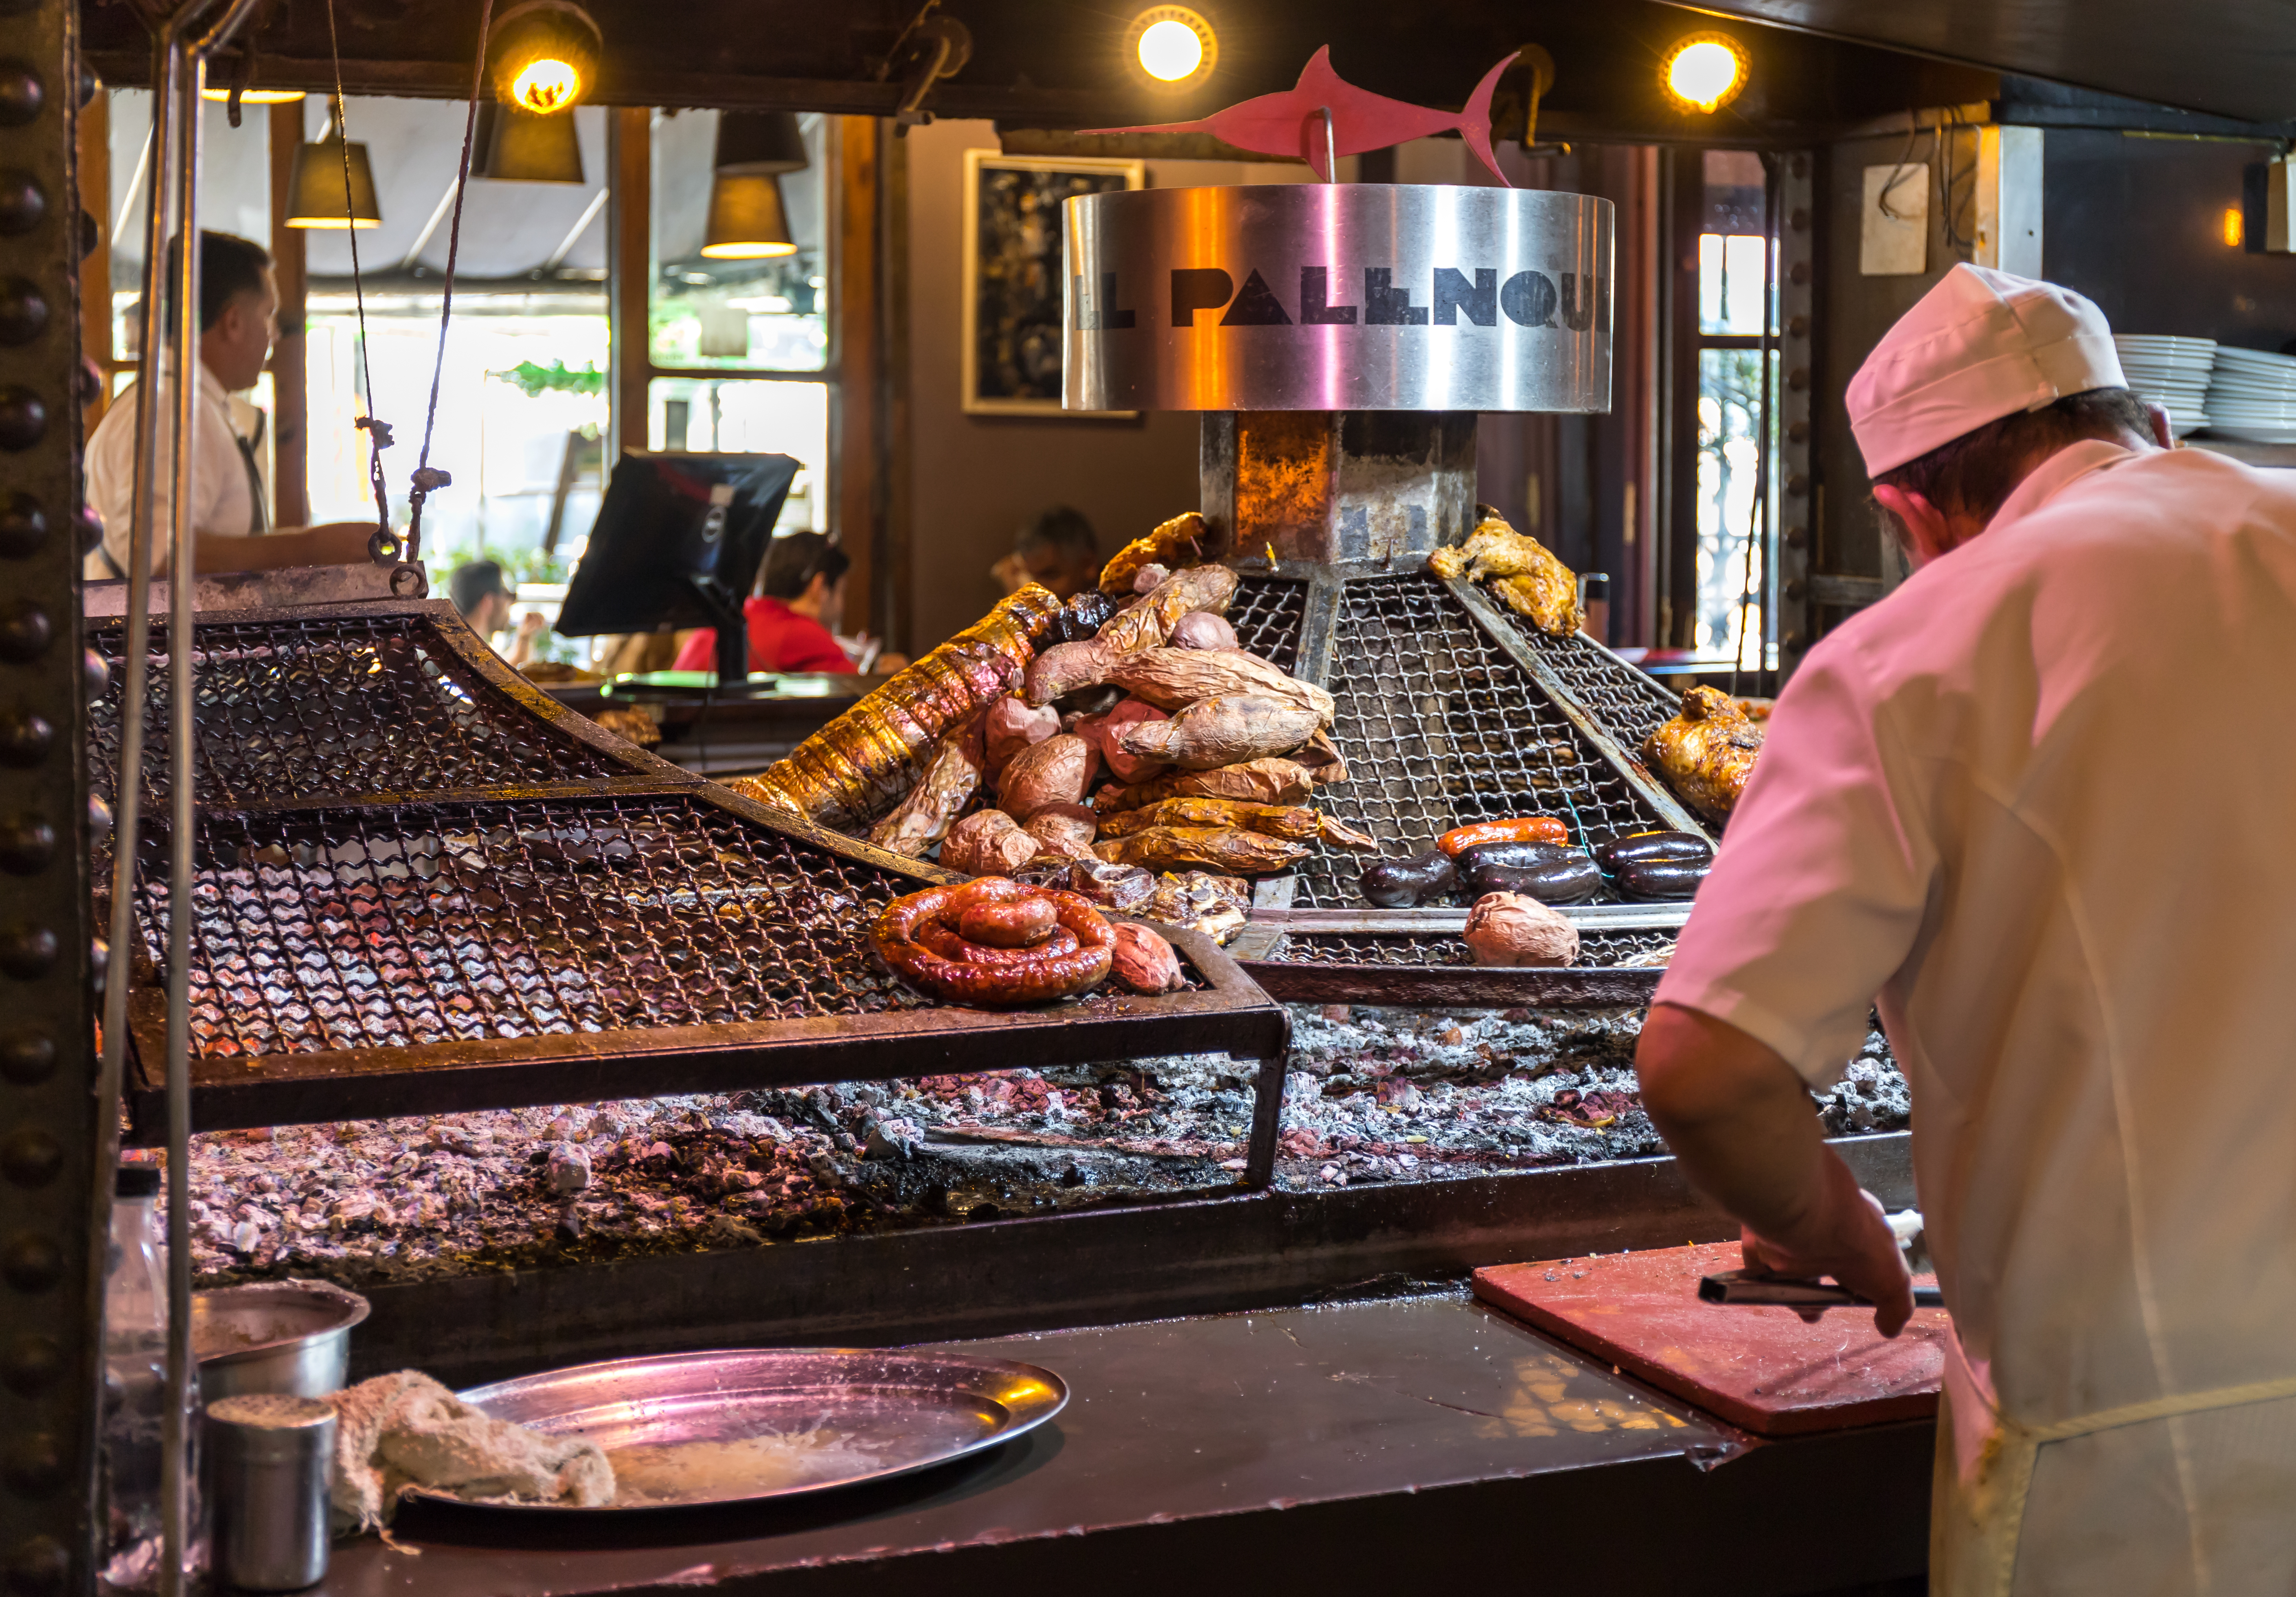 A chef works nearby a grill where meats cook.